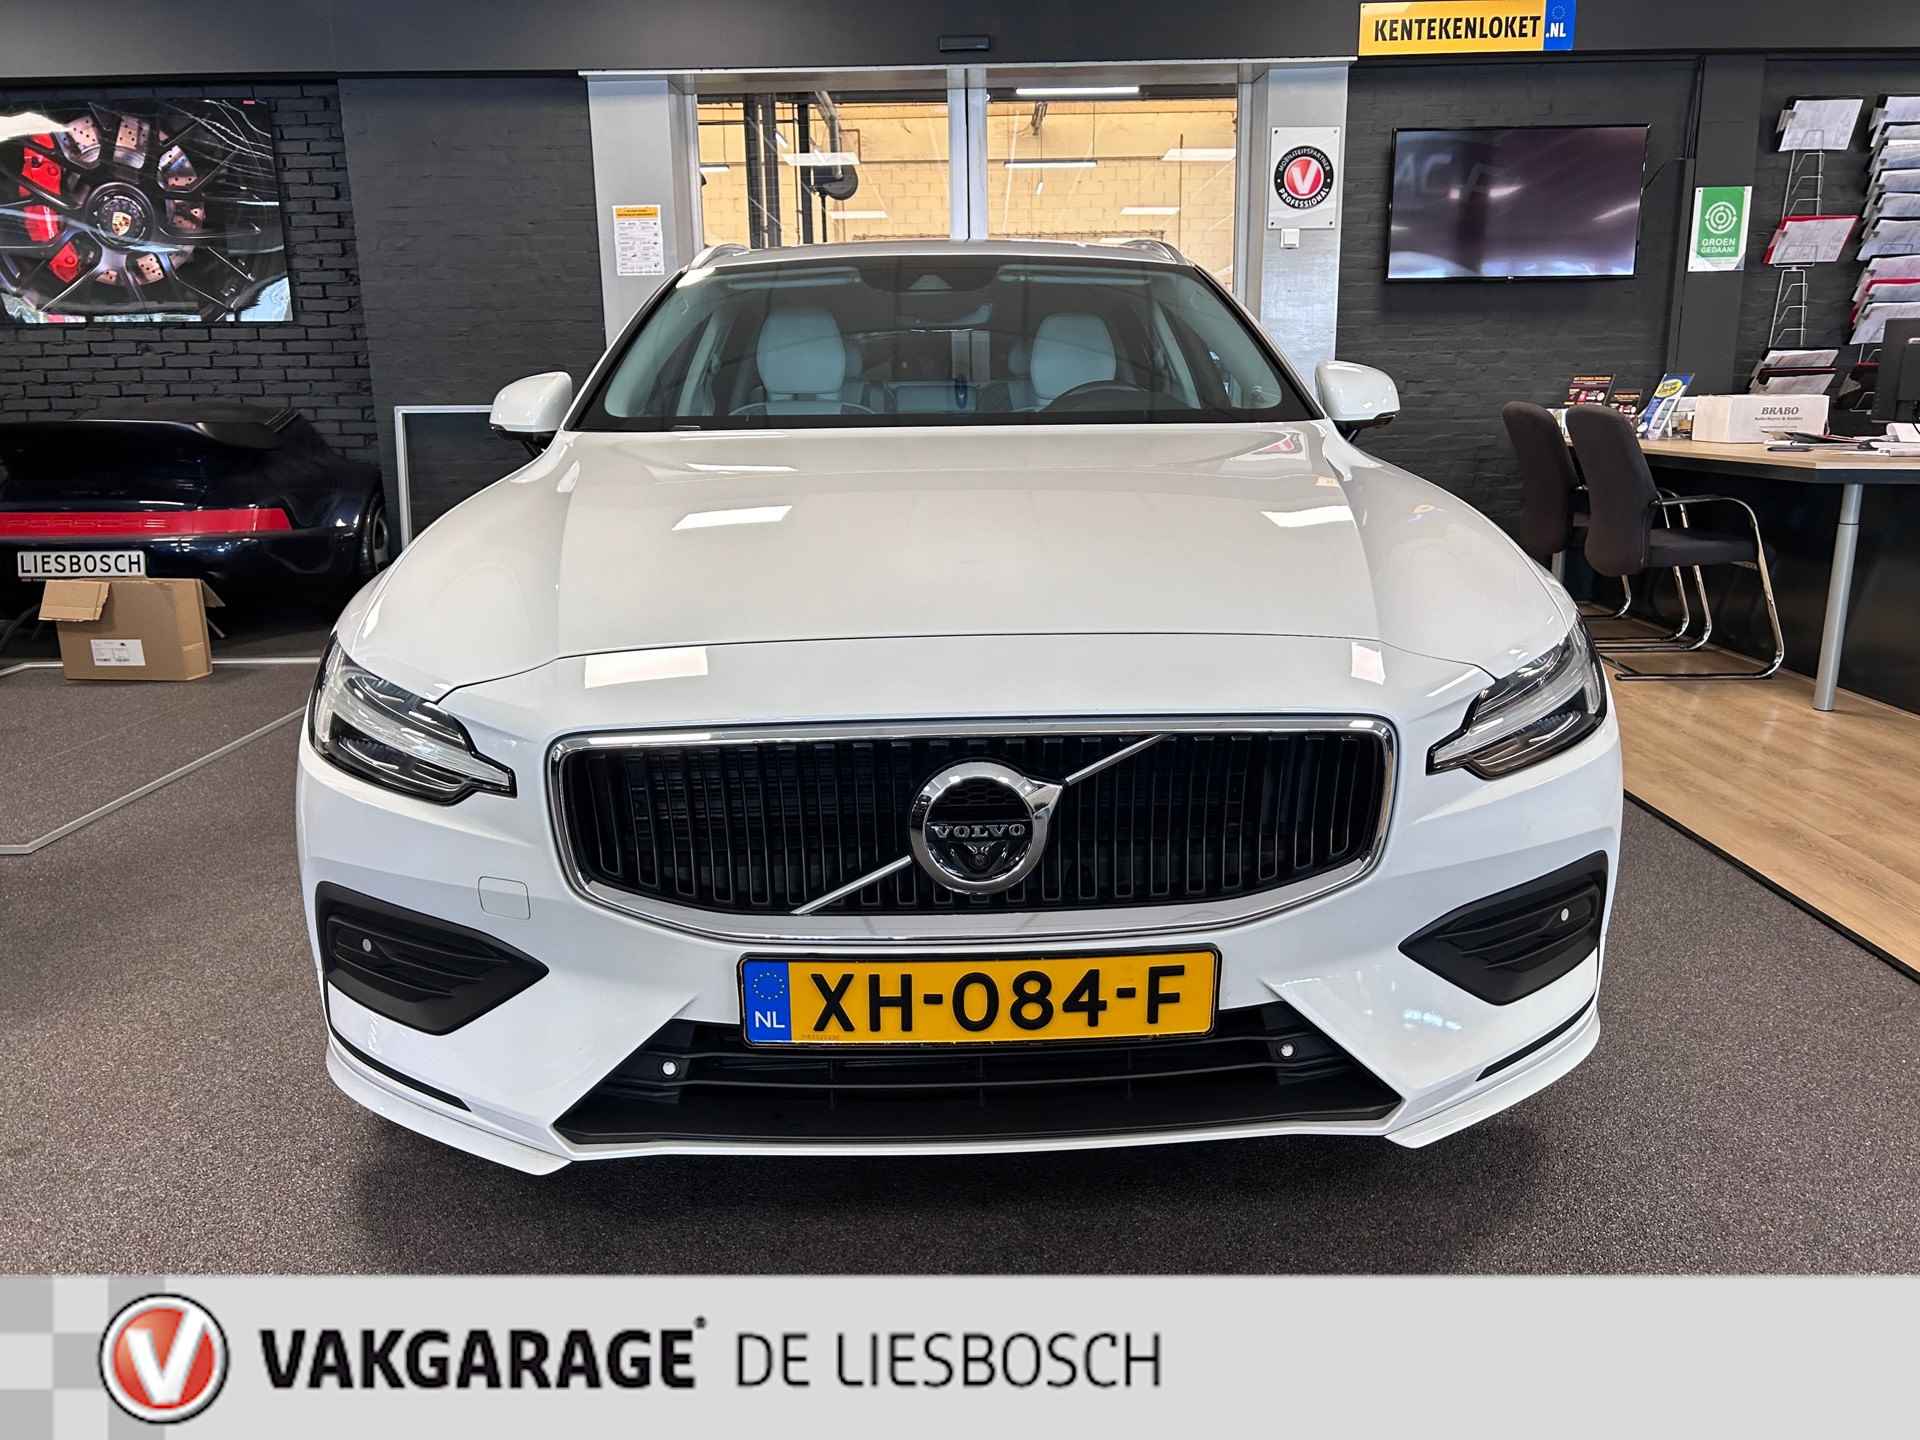 Volvo V60 2.0 T5 Momentum/Styling kit/Automaat/Led/20inch/360 camera - 10/34